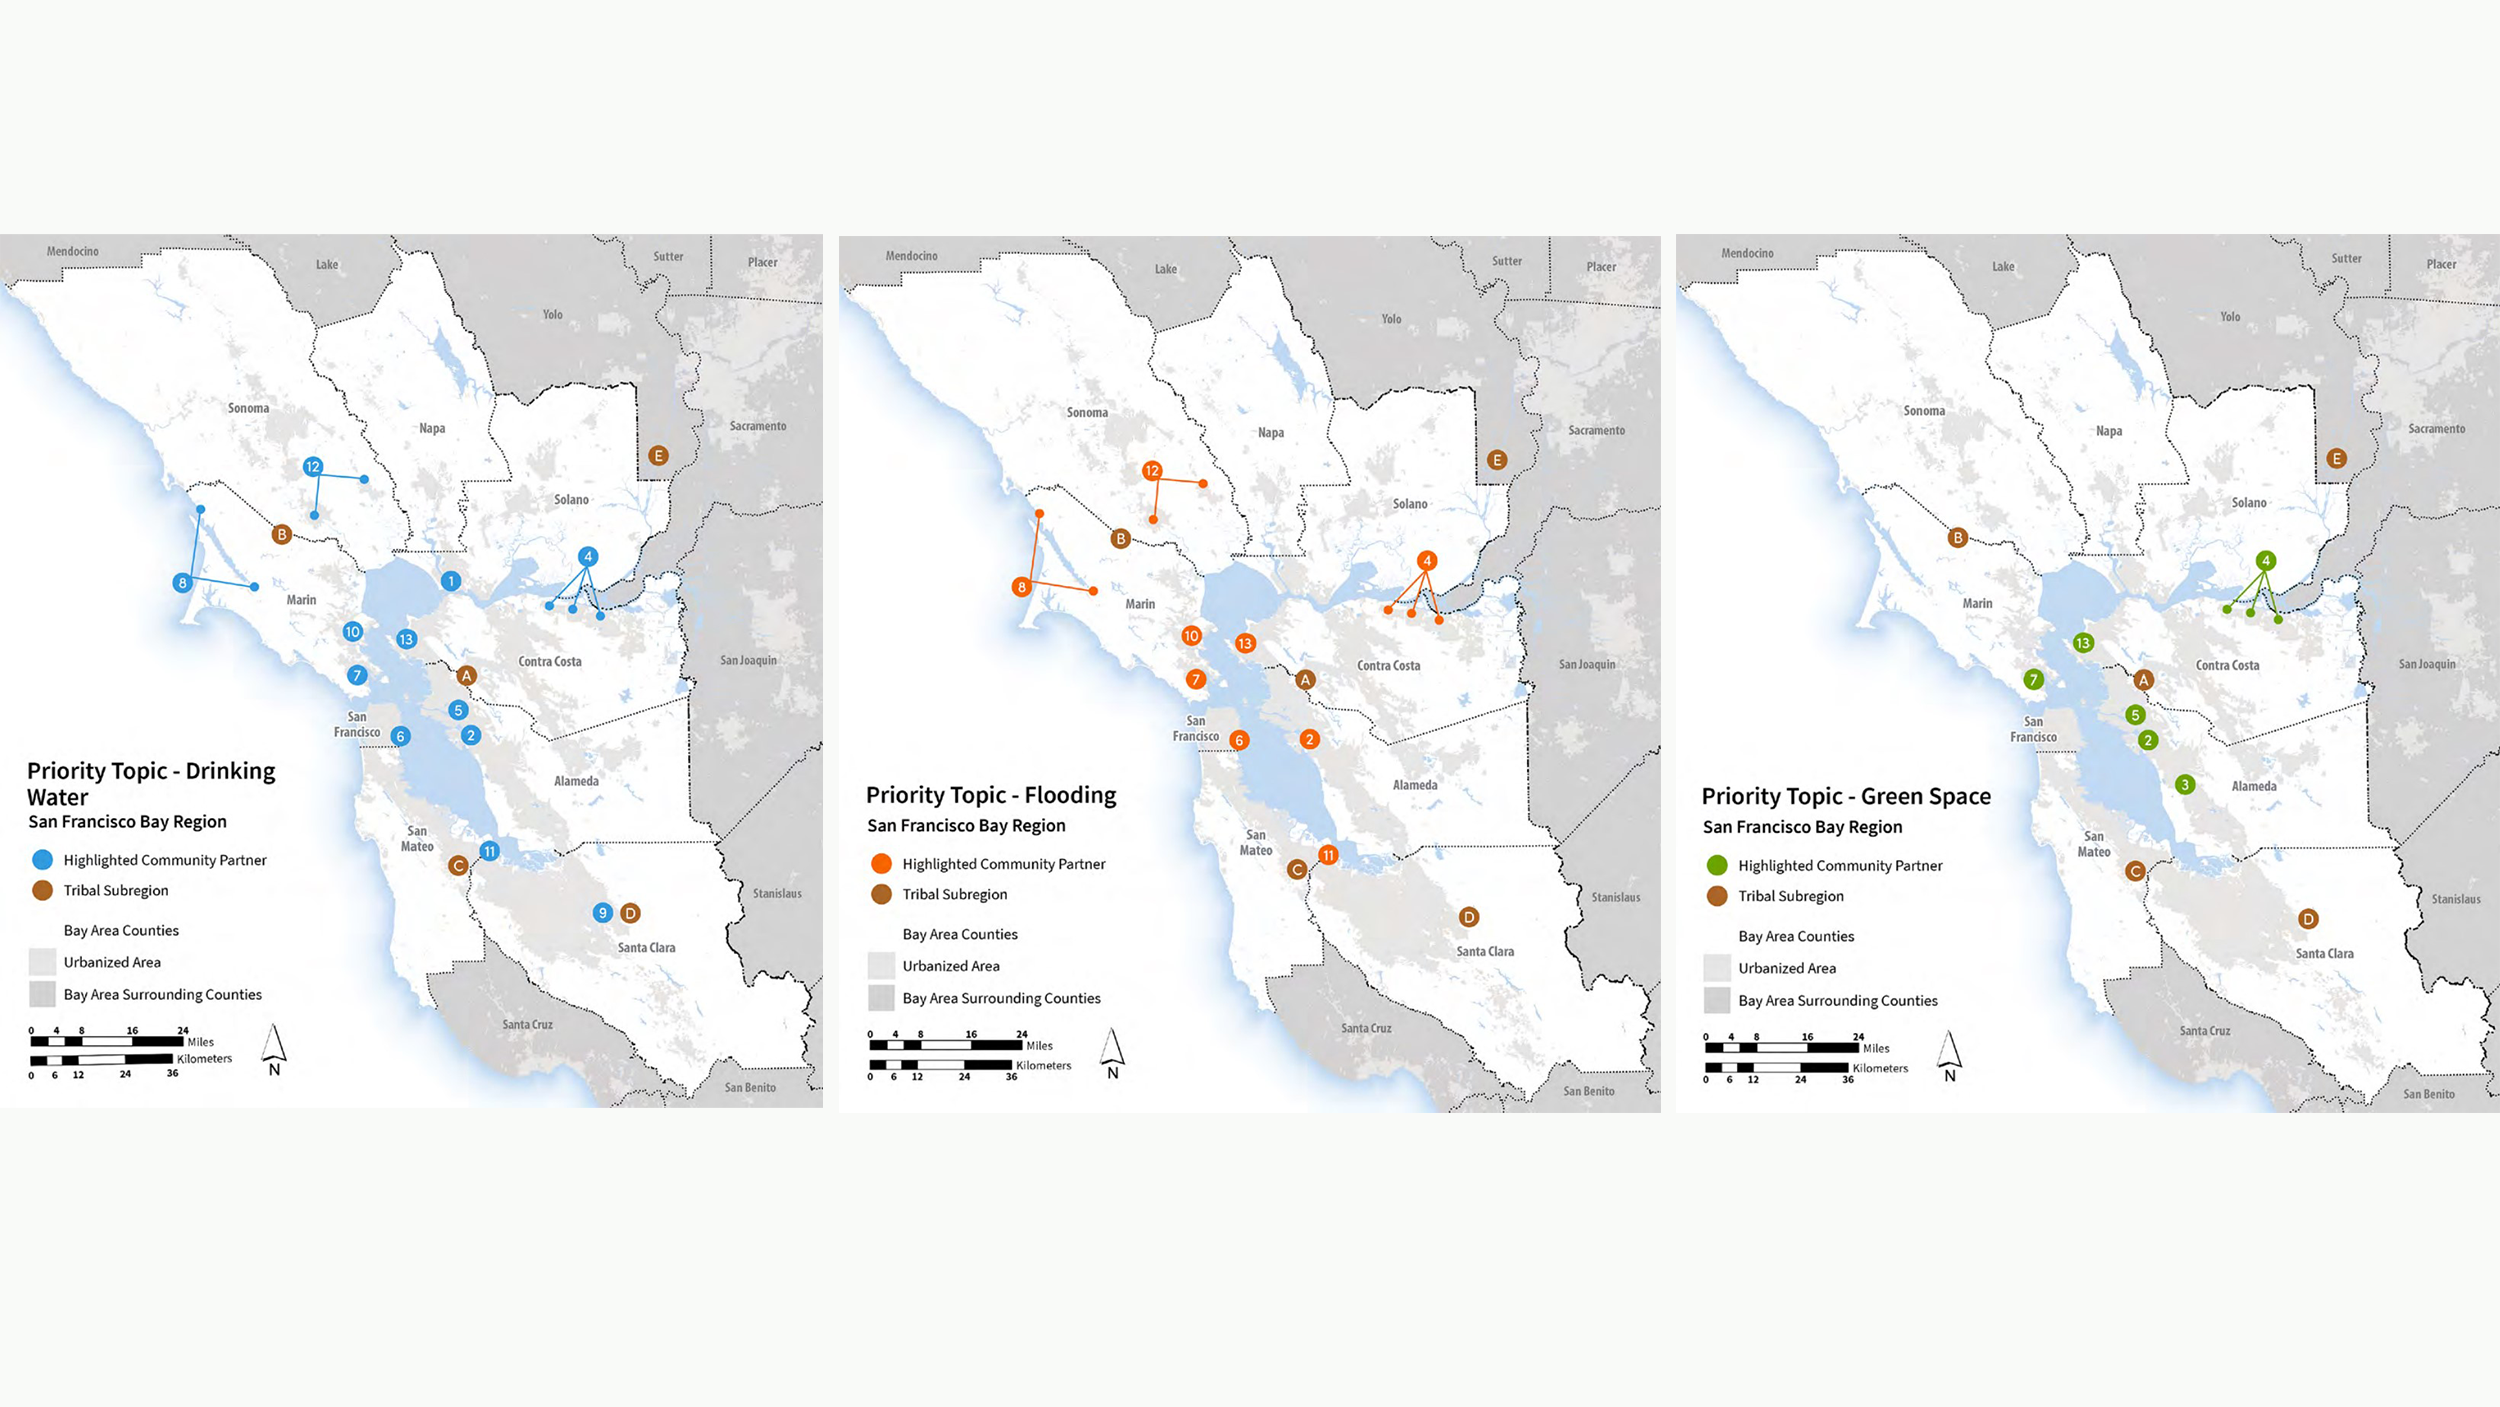 mapped results of needs assessment findings in the Bay Area